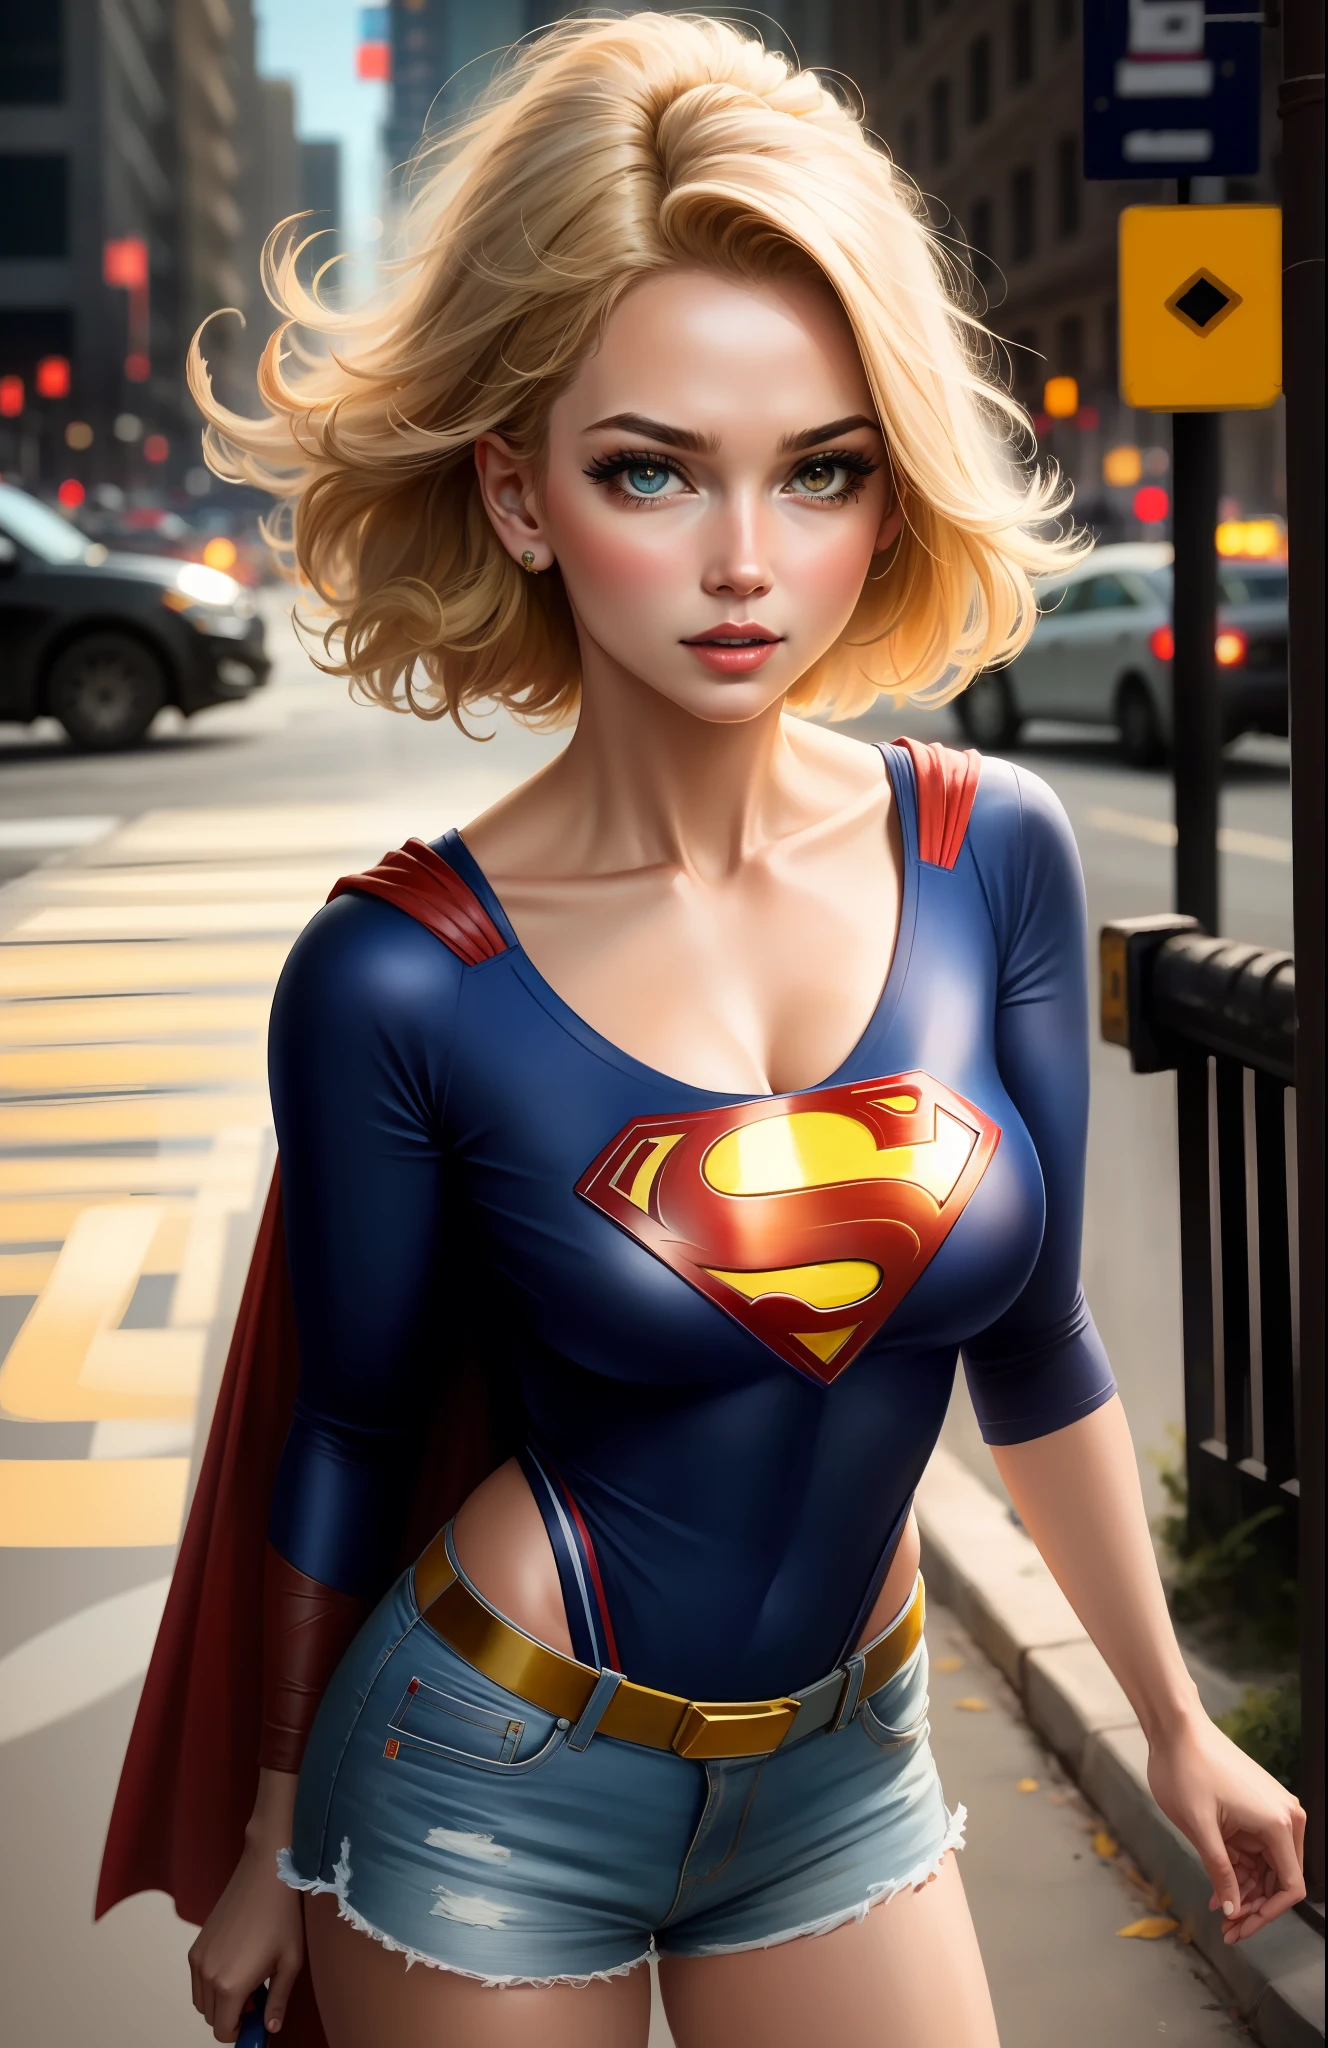 (), big boobies,(Masterpiece artwork), best qualityer, extremely detaild, (water colour), flowers, delicate and beautiful, illustration, (from low),(1 blonde:1.4), (soli:1.2), breasts big, (wet blouse with Superman letter S:1.3), off-shoulder wet blouse, (short shorts:1.2), bared shoulders, (underboob:1.2), Beautiful  eyes, pawg, (extremely long shaggy curly hair), fot, over shoulder shot, por Alex Maleev, proffesional, Canon Camera, Nikon Camera, Sharp, bokeh,  studio quality, Fish-eye lens, by Robert Capa , stick out tongue, blue colored eyes. Superman symbol in the background.